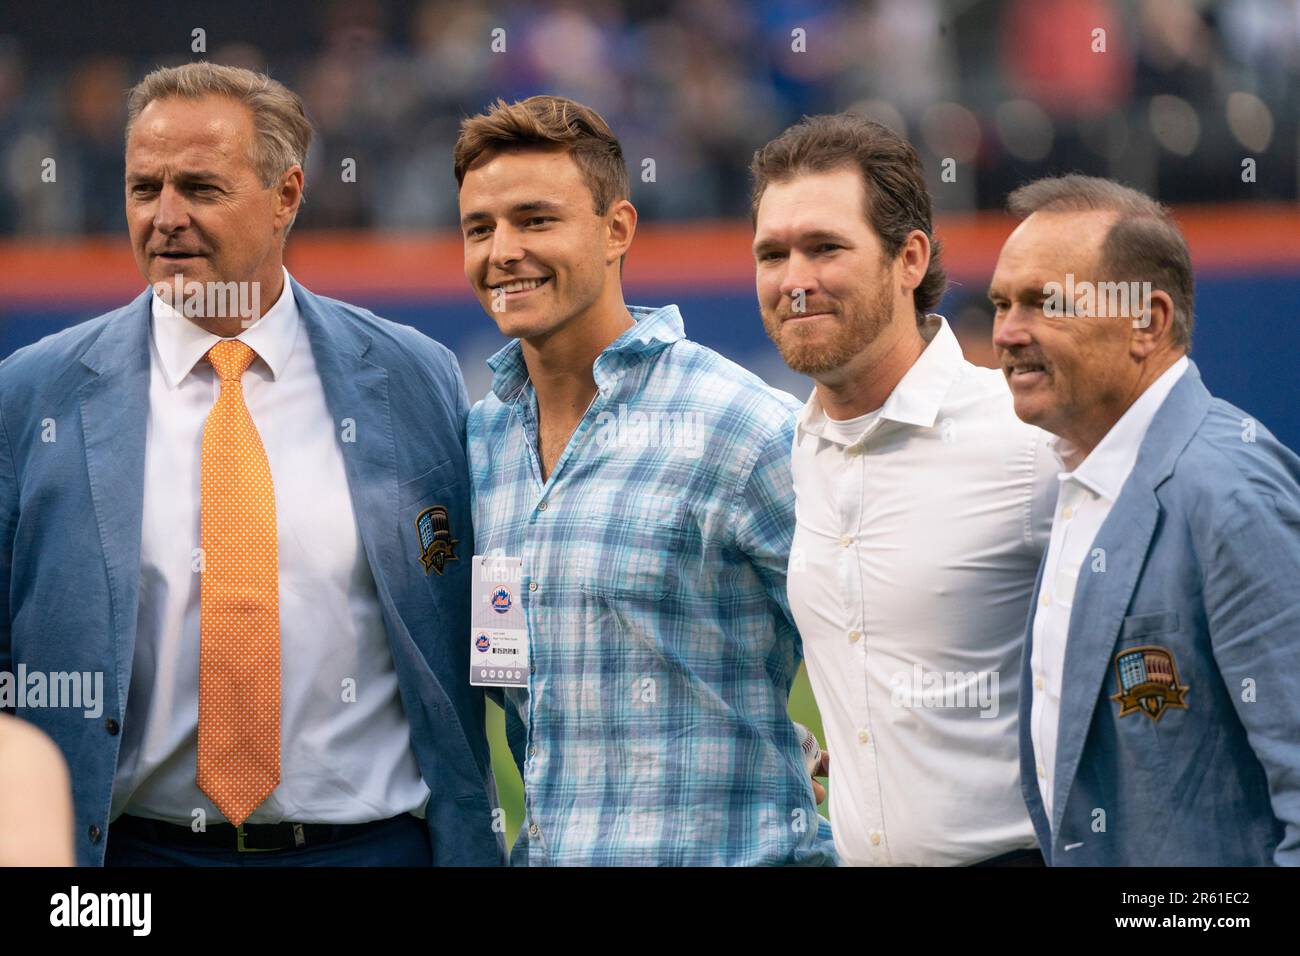 FLUSHING, NY - JUNE 03: Former New York Mets Pitcher Al Leiter and